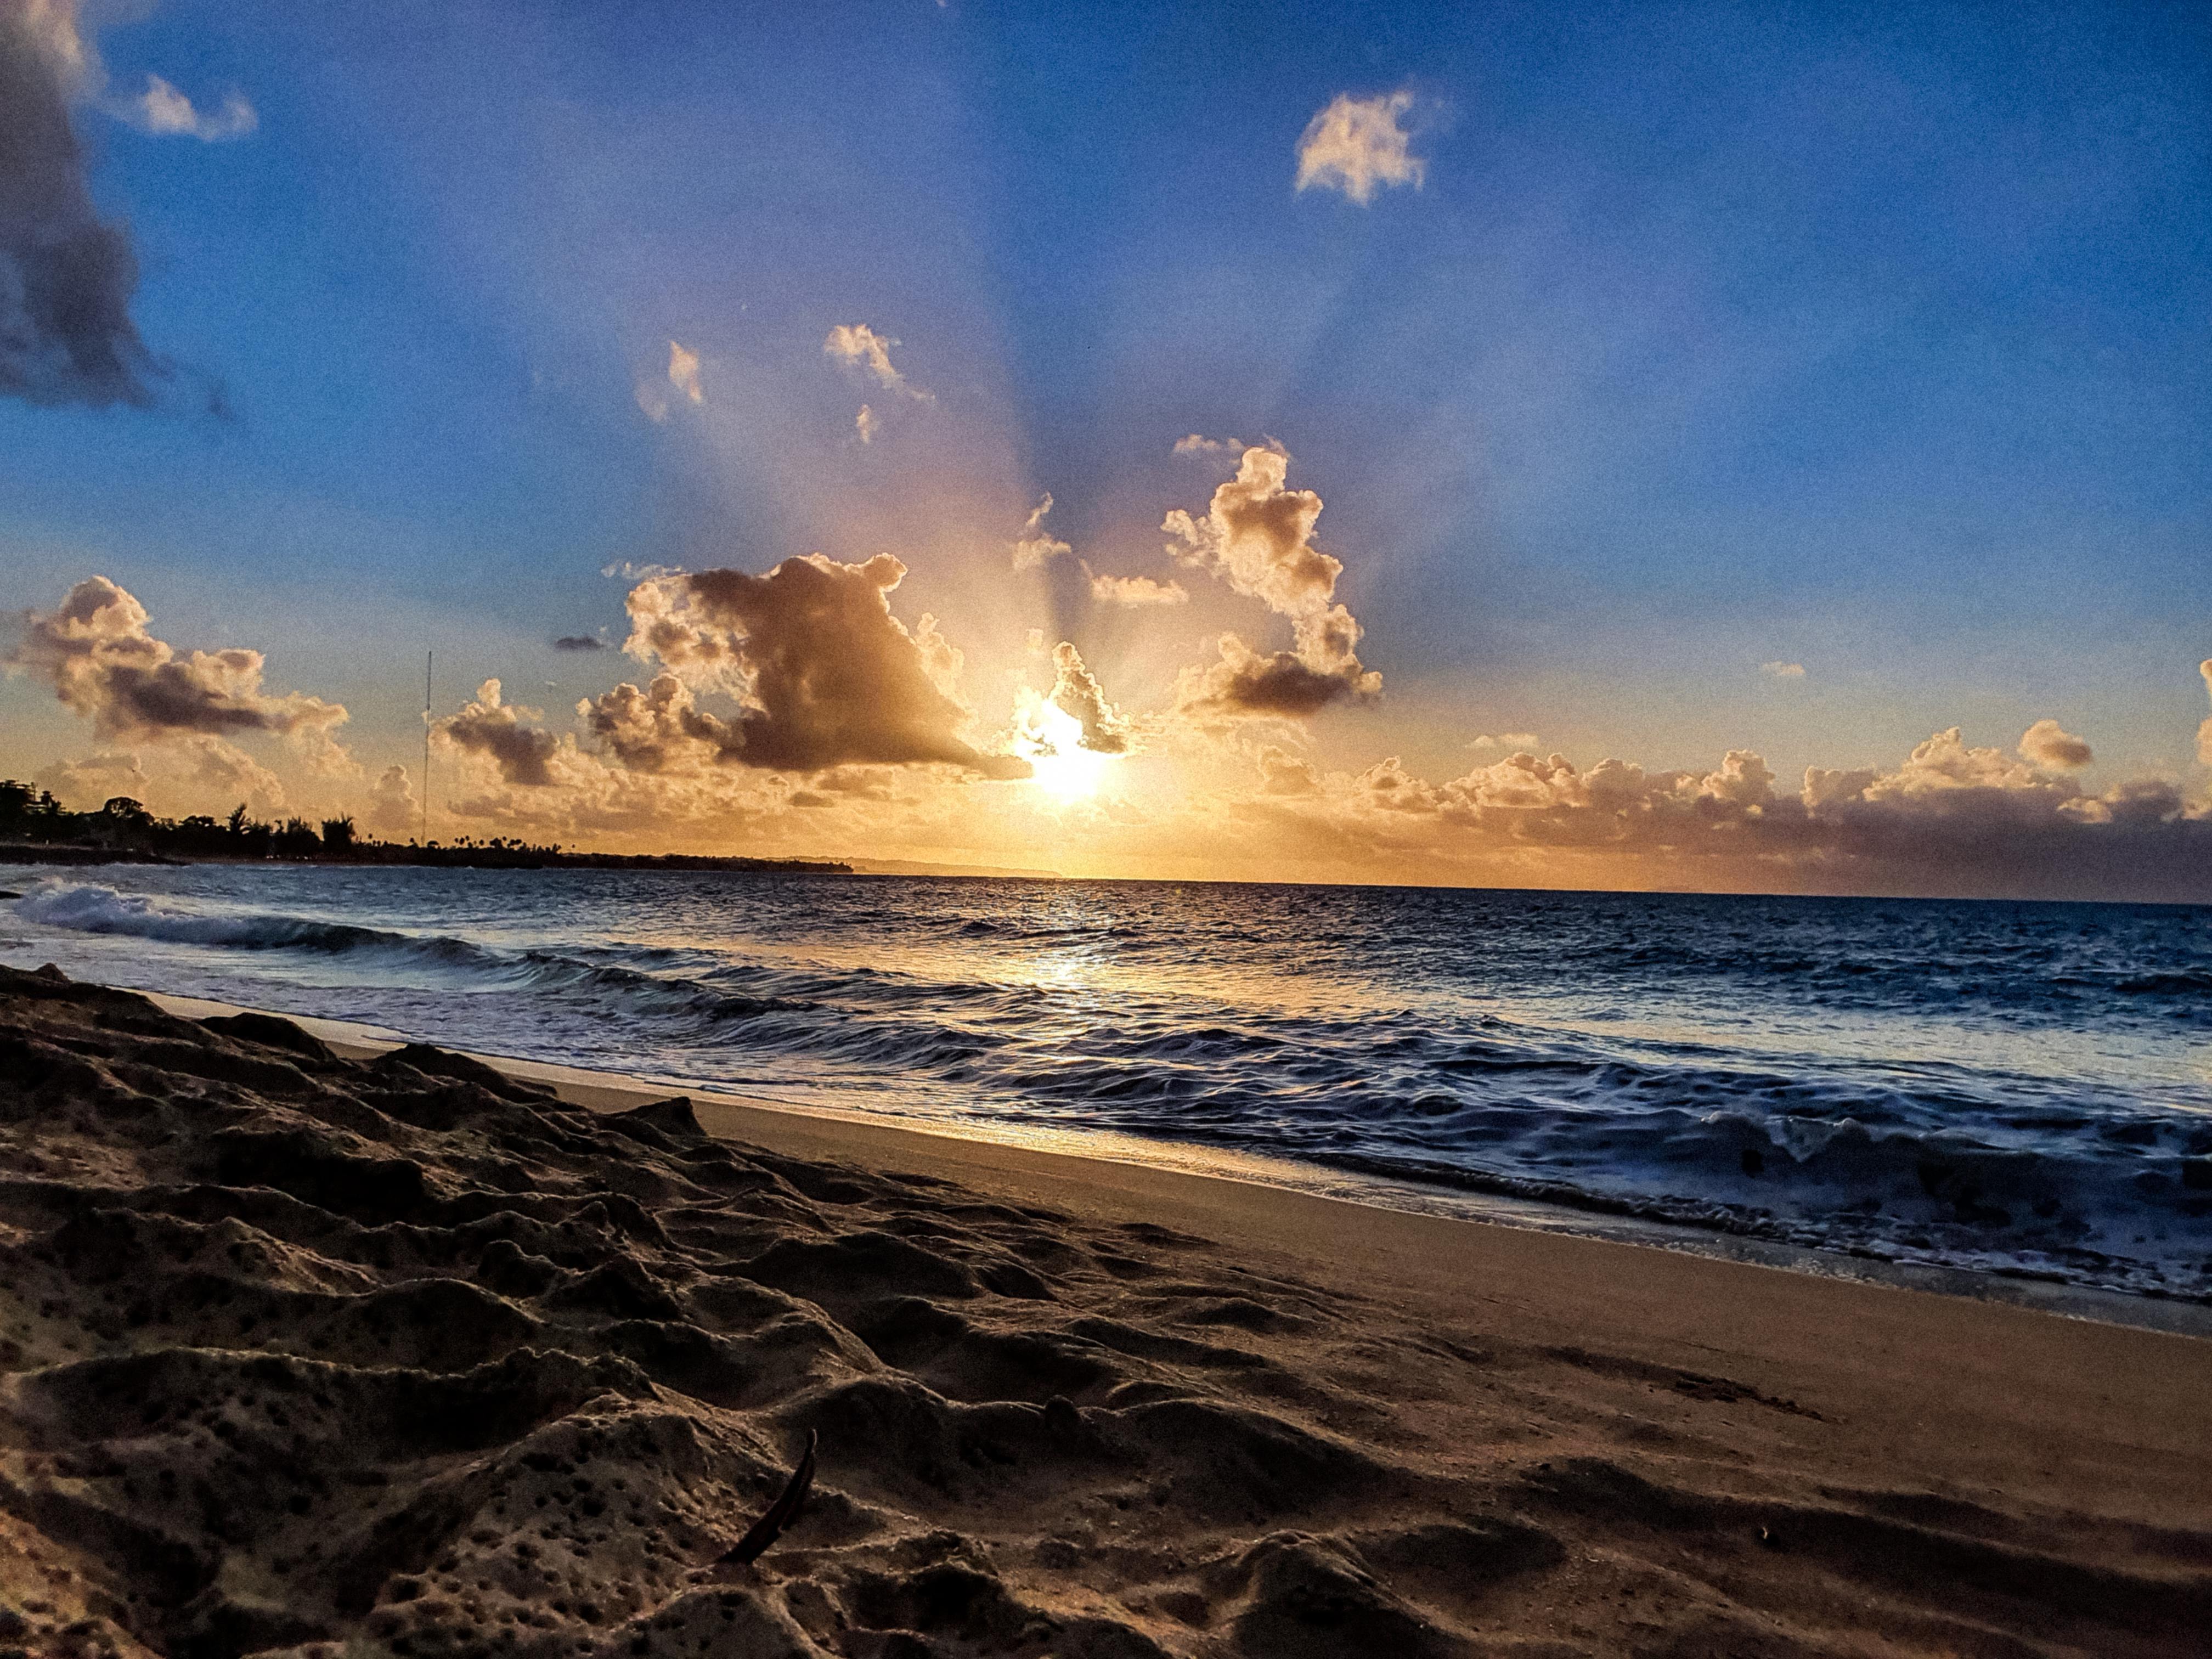 Puerto Rico Beach Sunset Wallpapers Top Free Puerto Rico Beach Sunset Backgrounds 7123